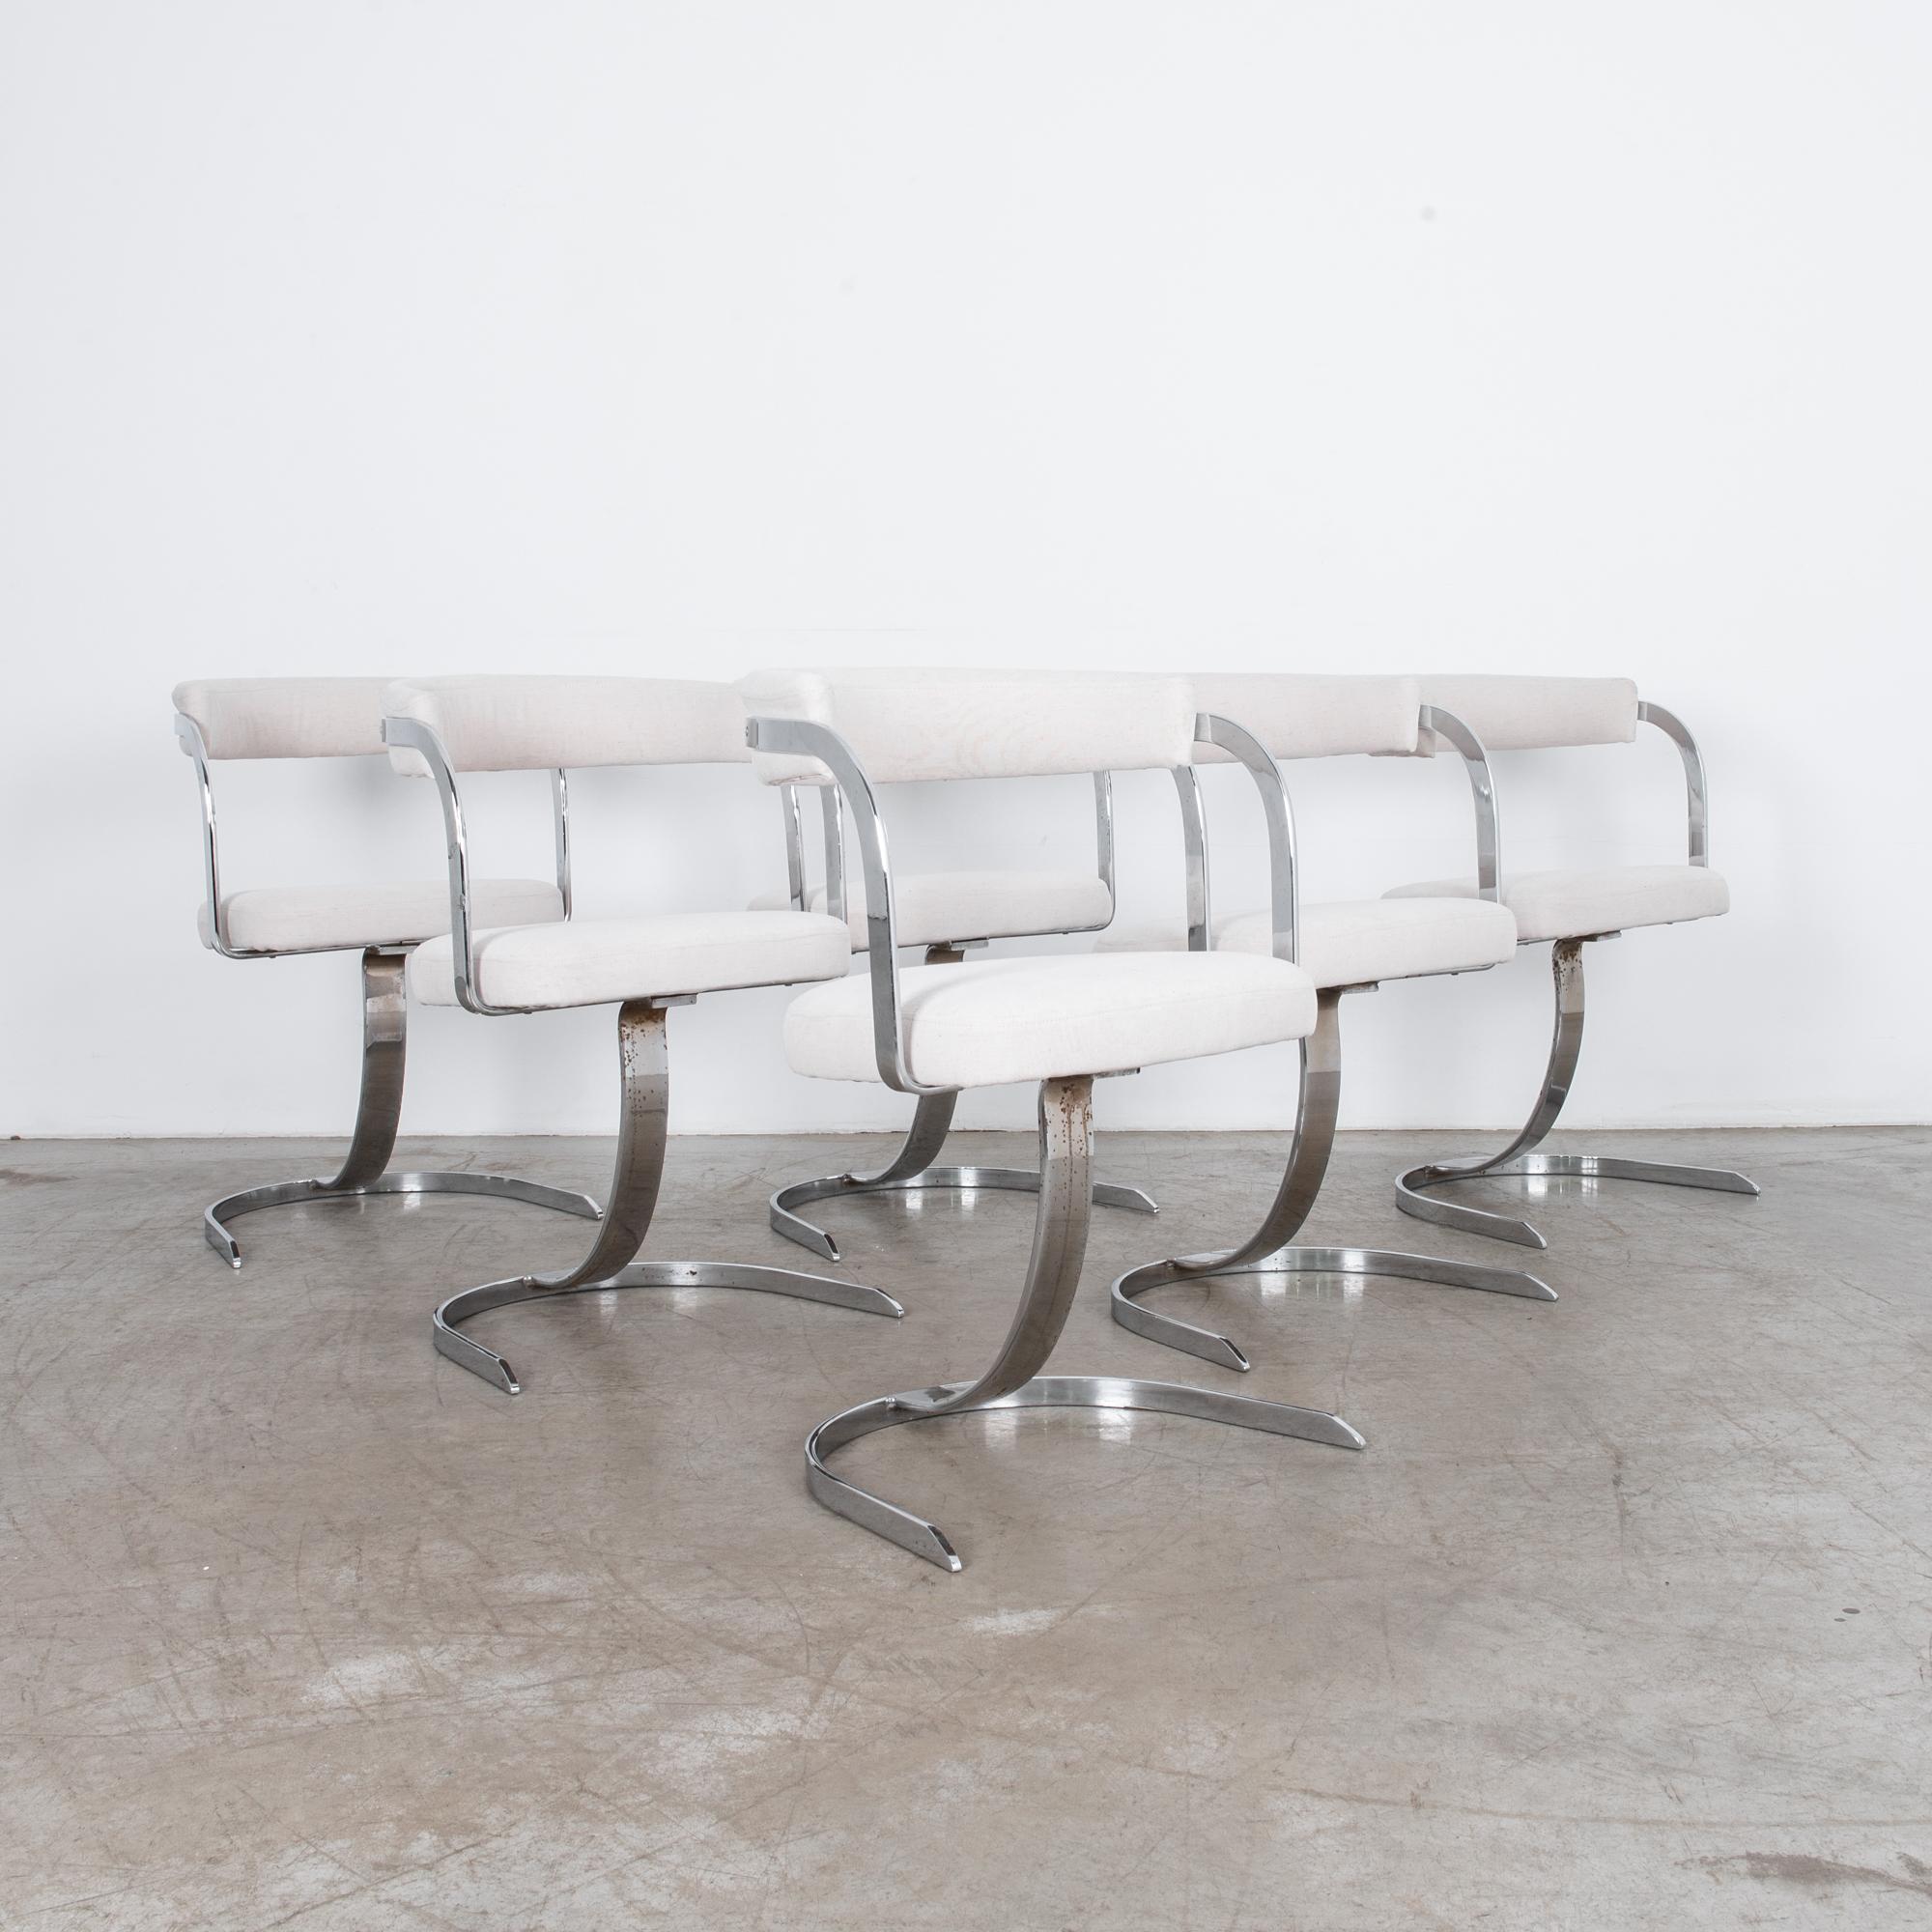 Counter-height armchairs, with tall single cantilevered leg. From France, circa 1960. Unique form in chrome plated steel, with striking geometric arms. Organic geometries are multiplied by this complete set of six. Comfortable seat and back cushions